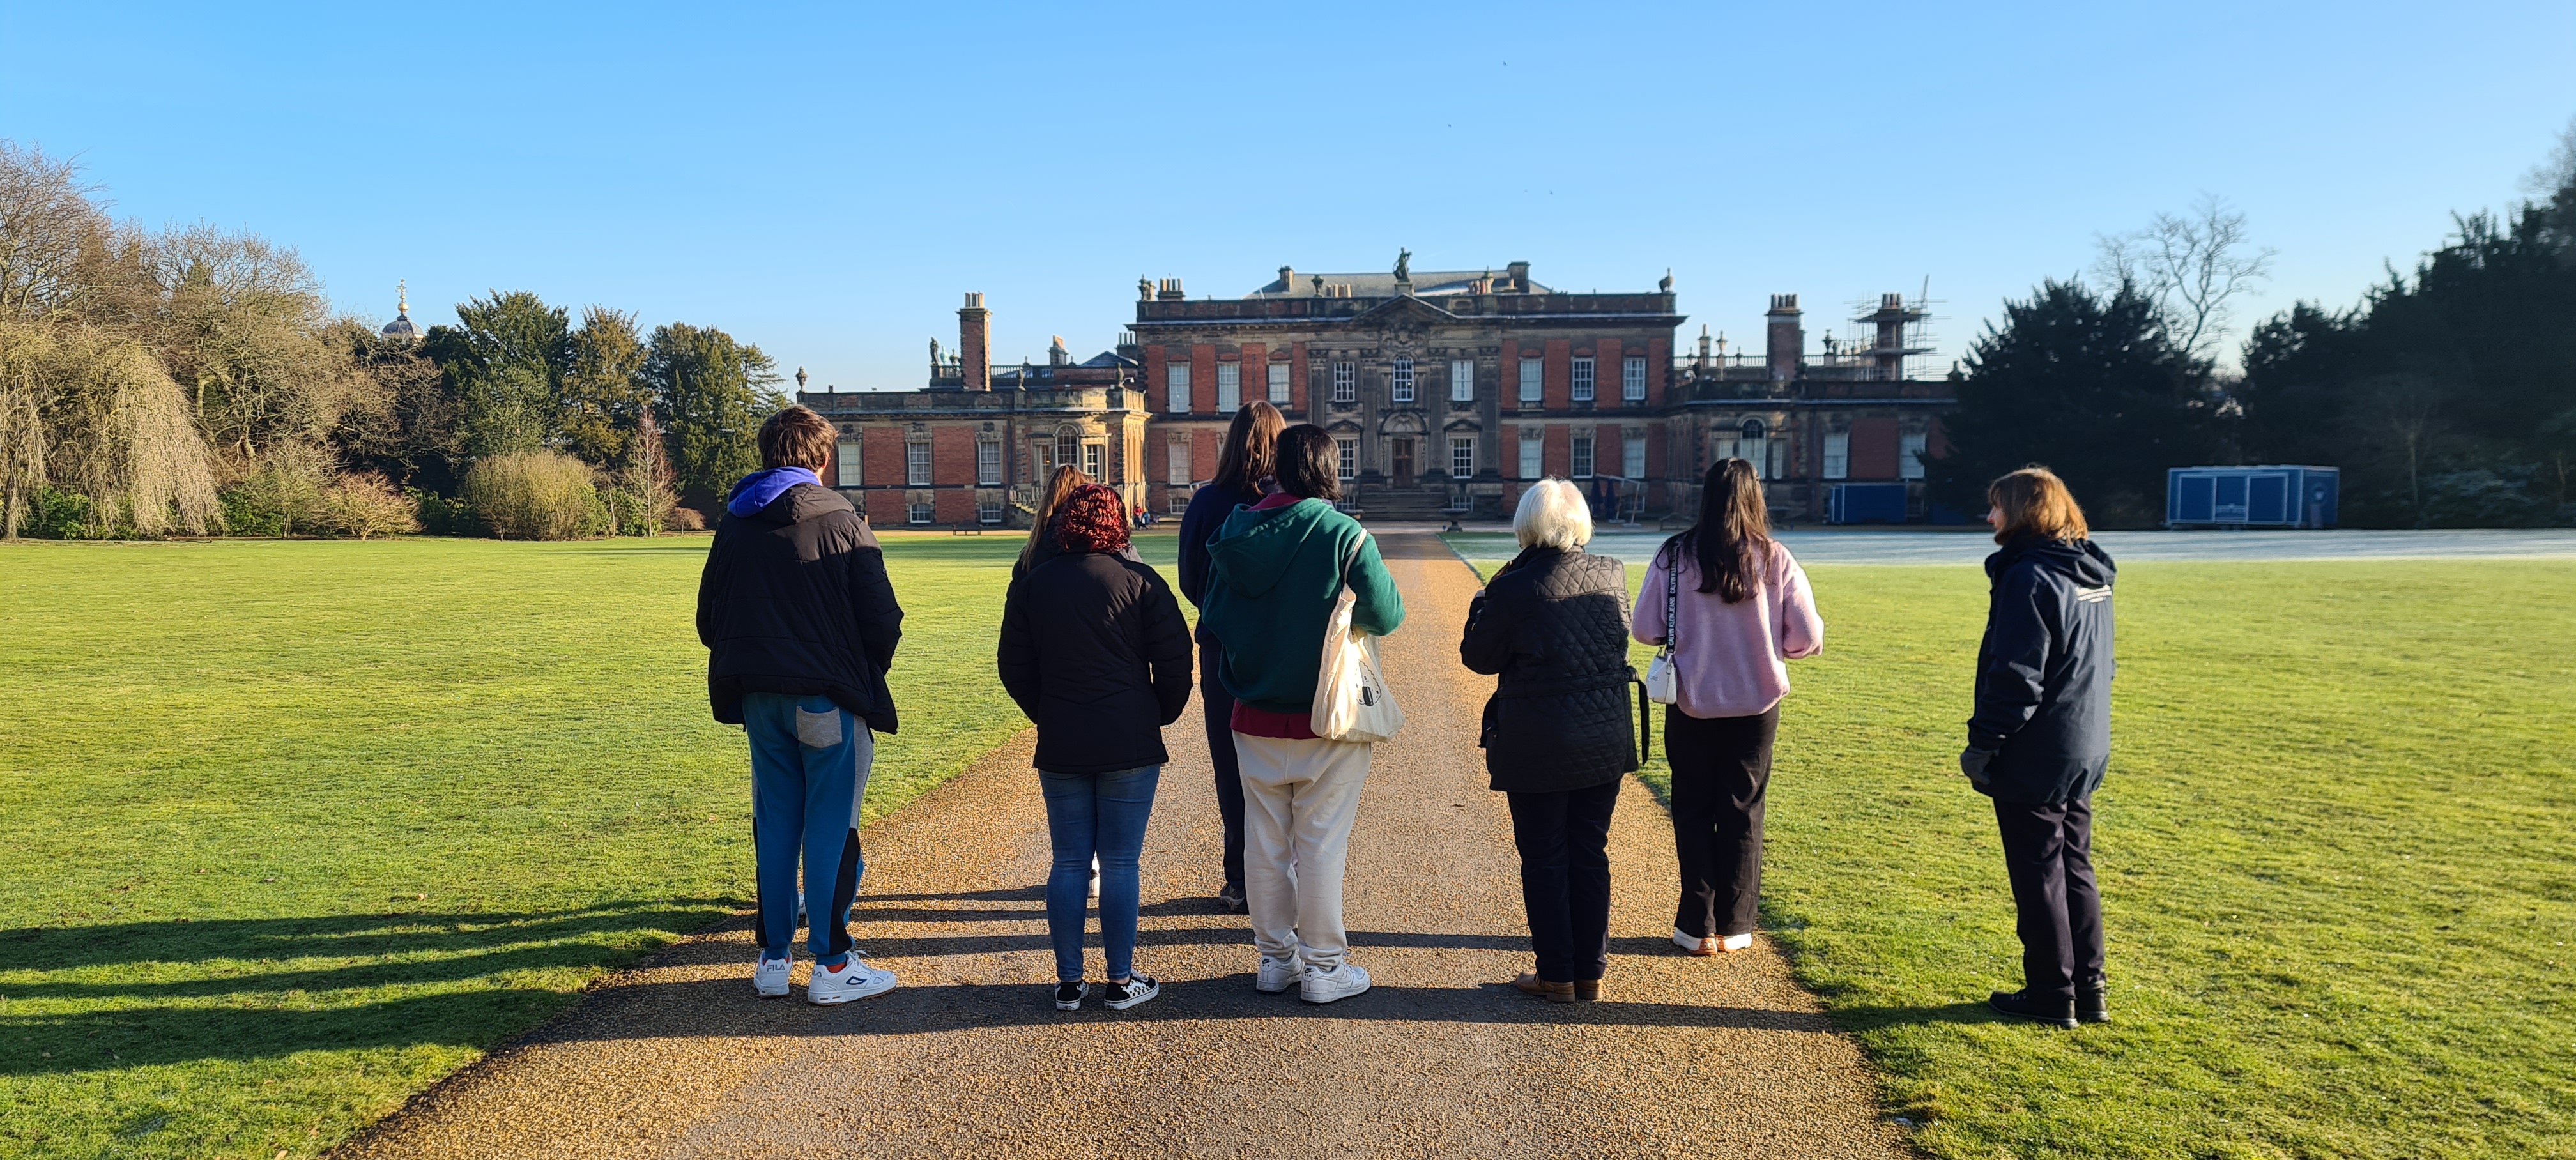 A group of young people stand outside Wentworth Woodhouse, facing the facade, on a sunny day.